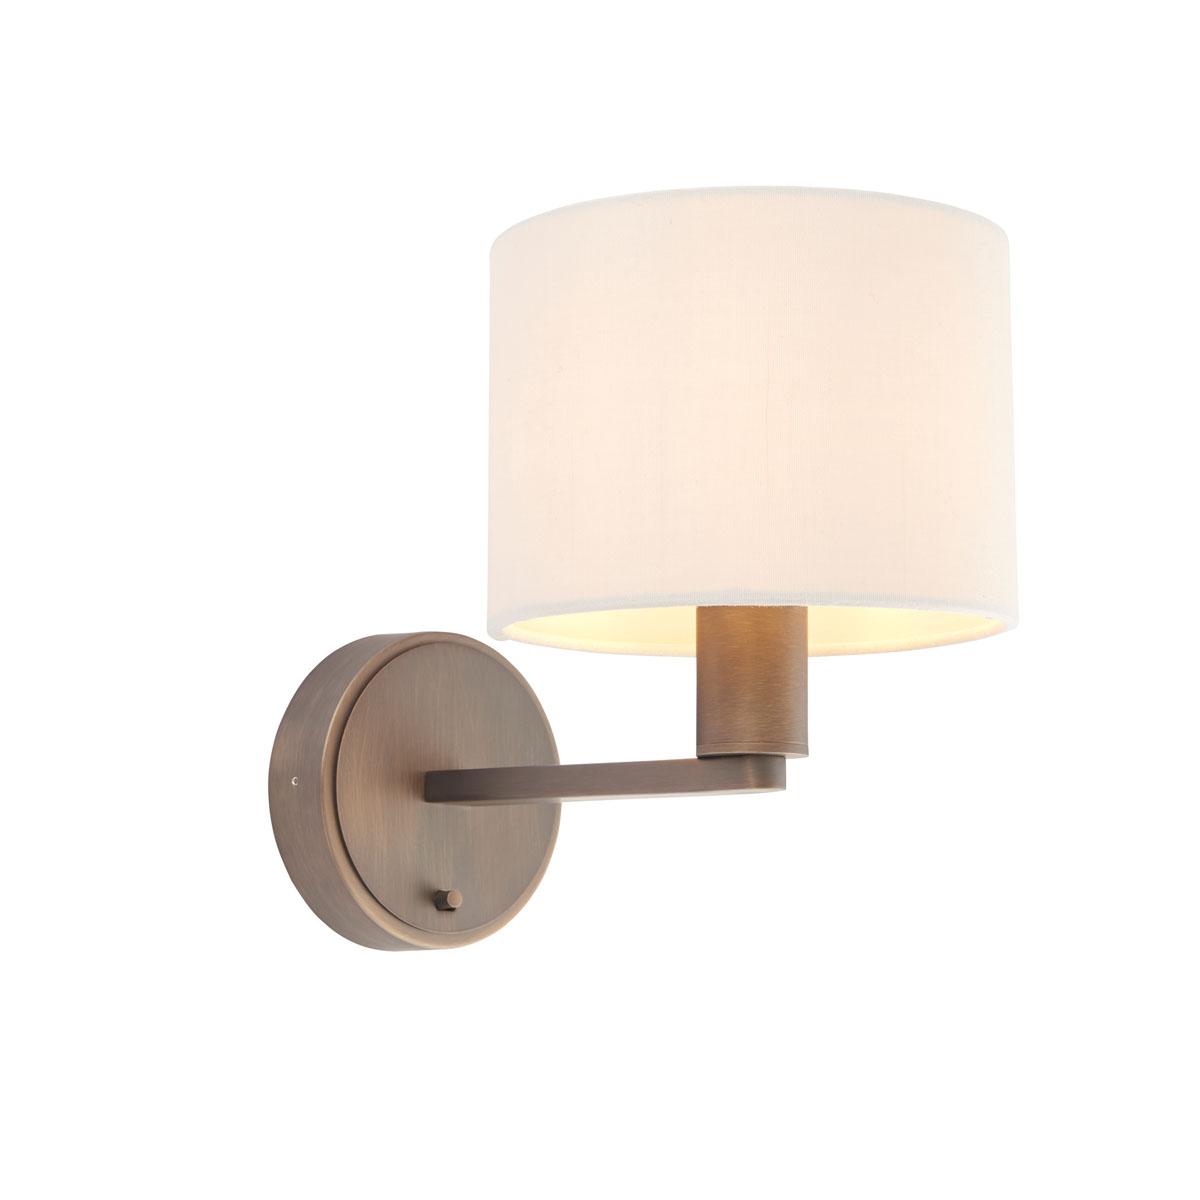 Daley Wall Light Bronze & Marble Faux Silk